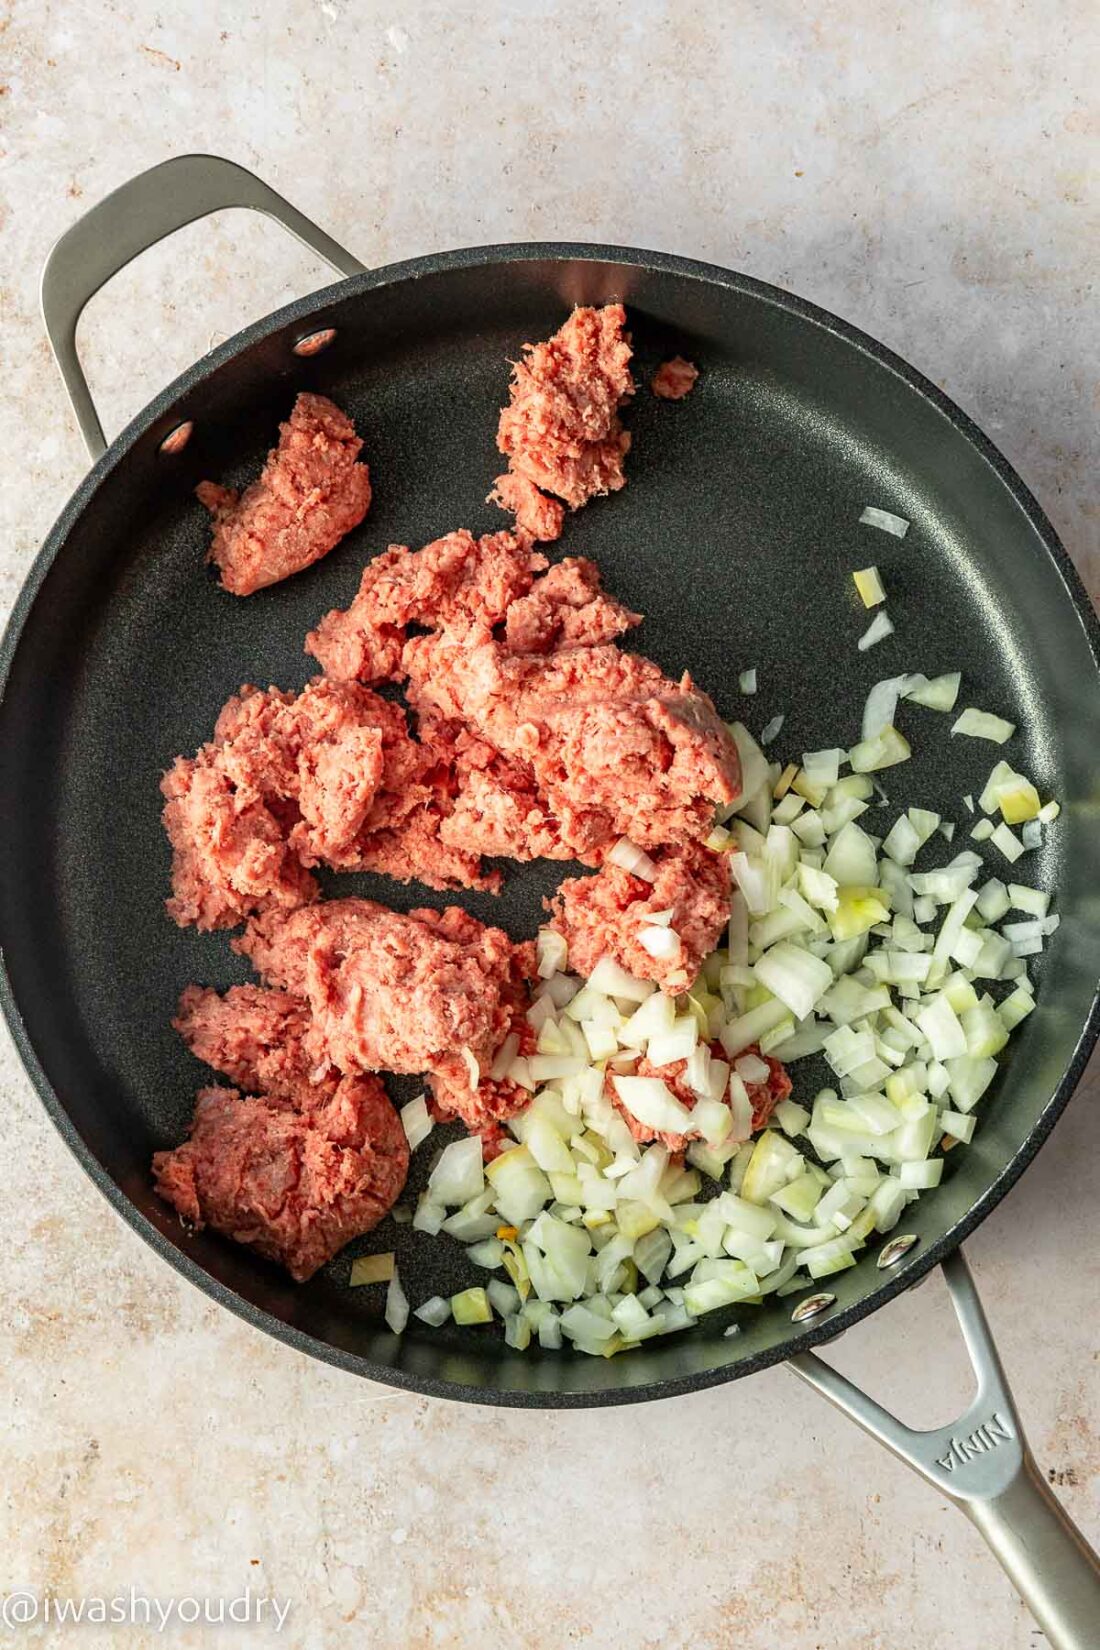 uncooked ground beef in skillet with onion on white surface.